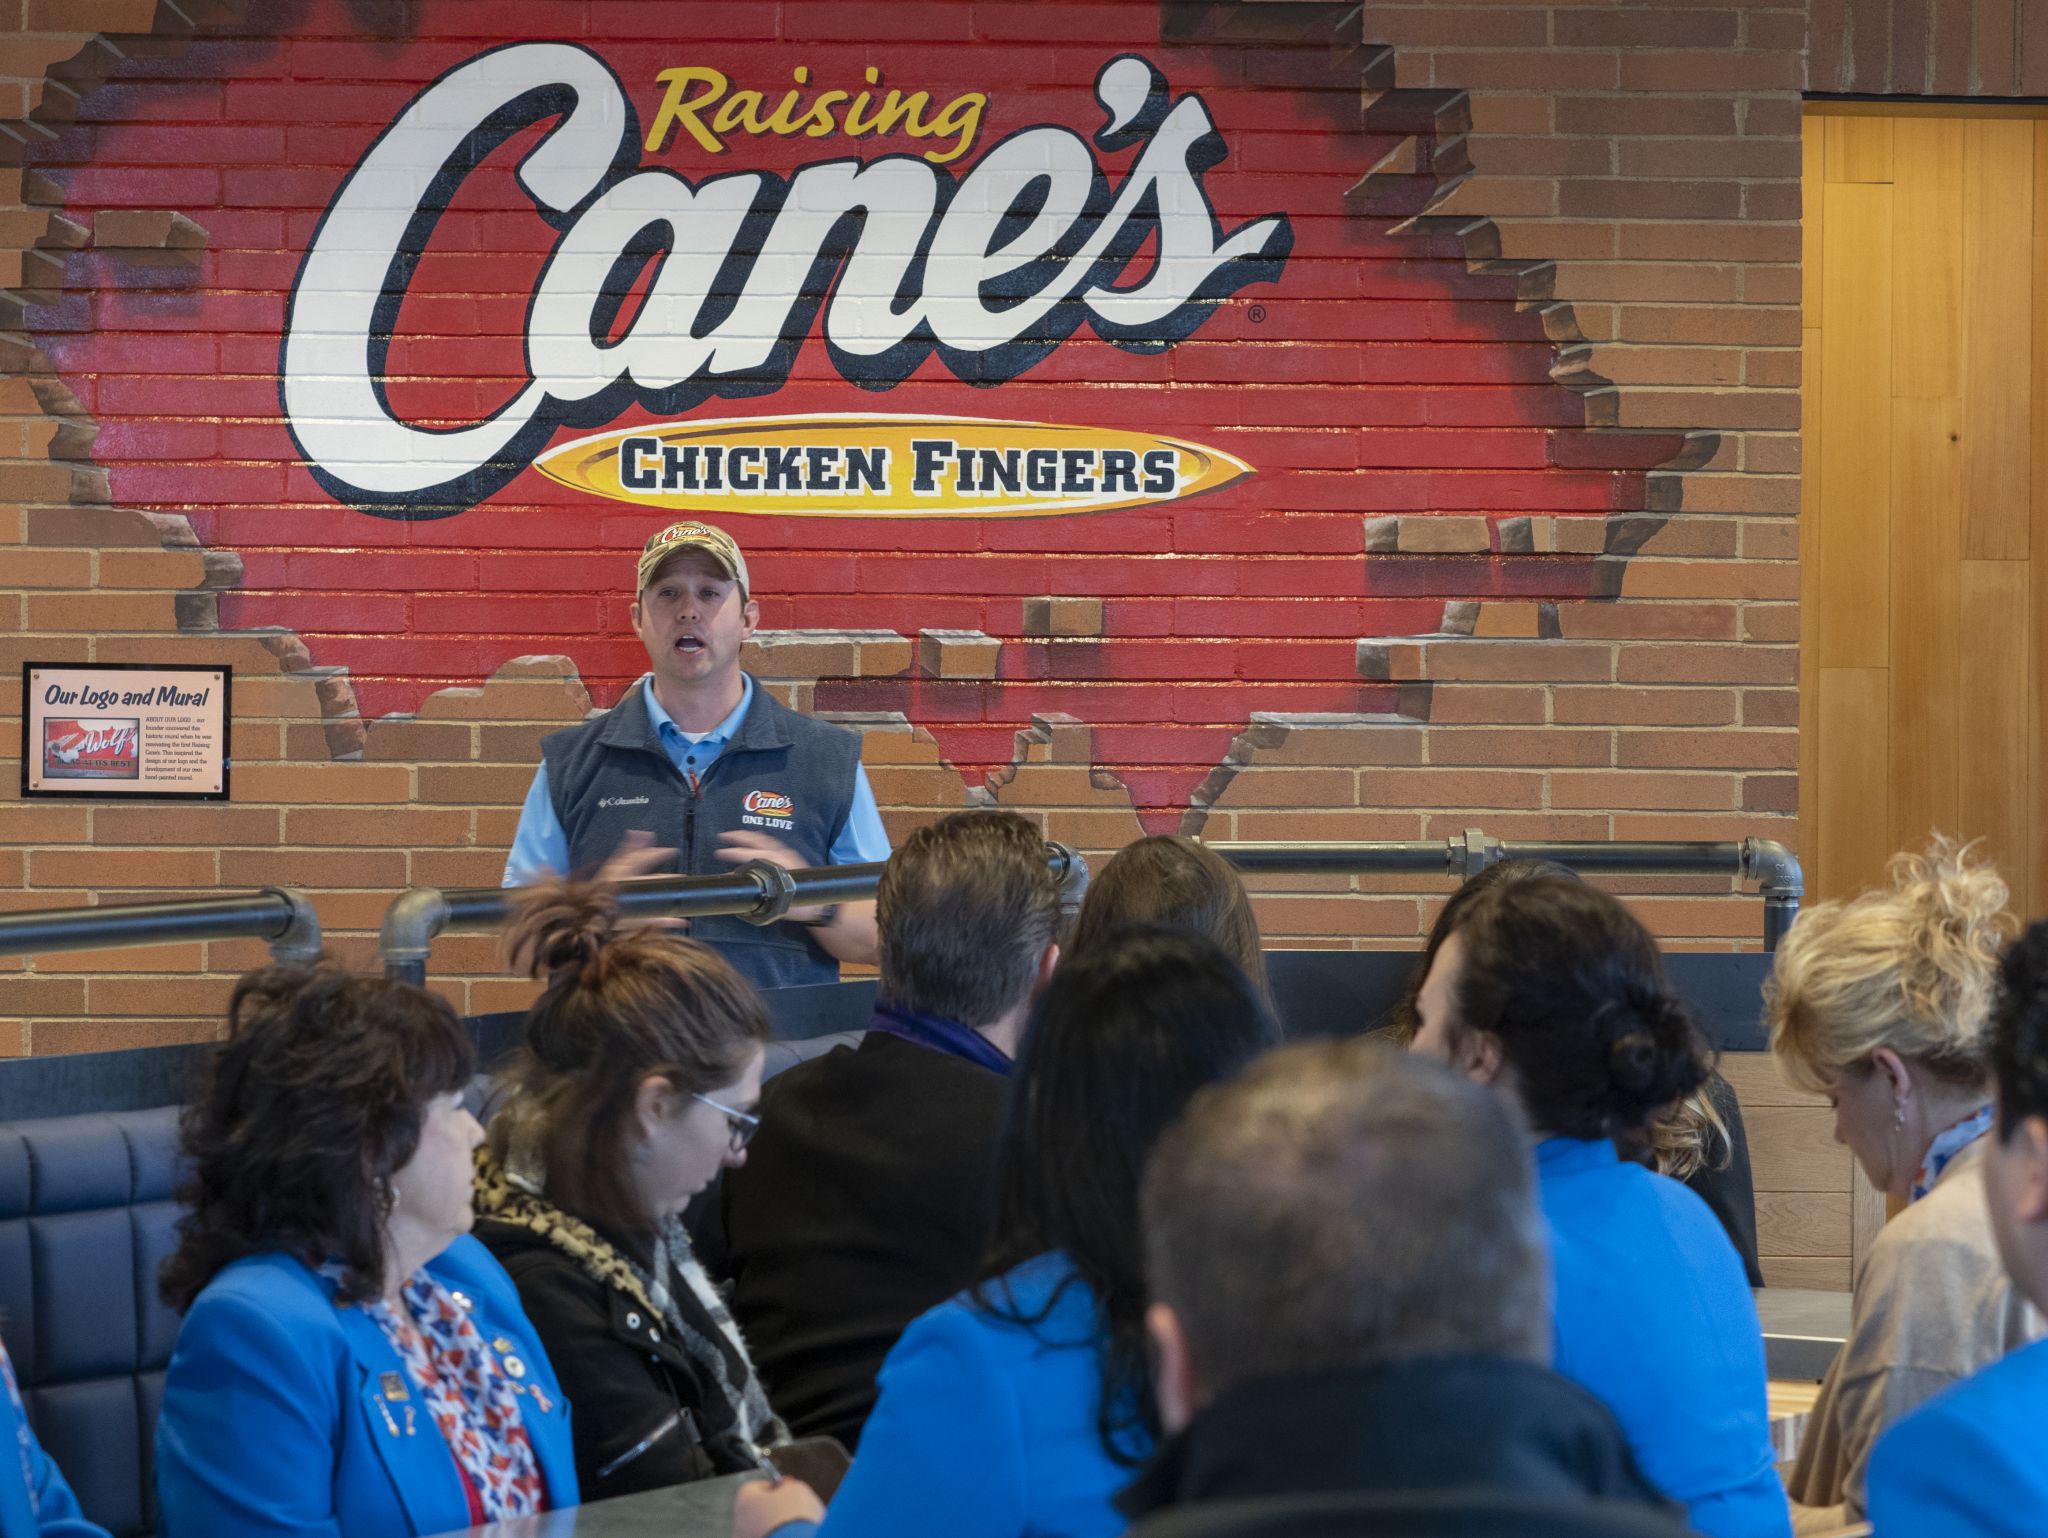 Scenes from Raising Cane's opening day